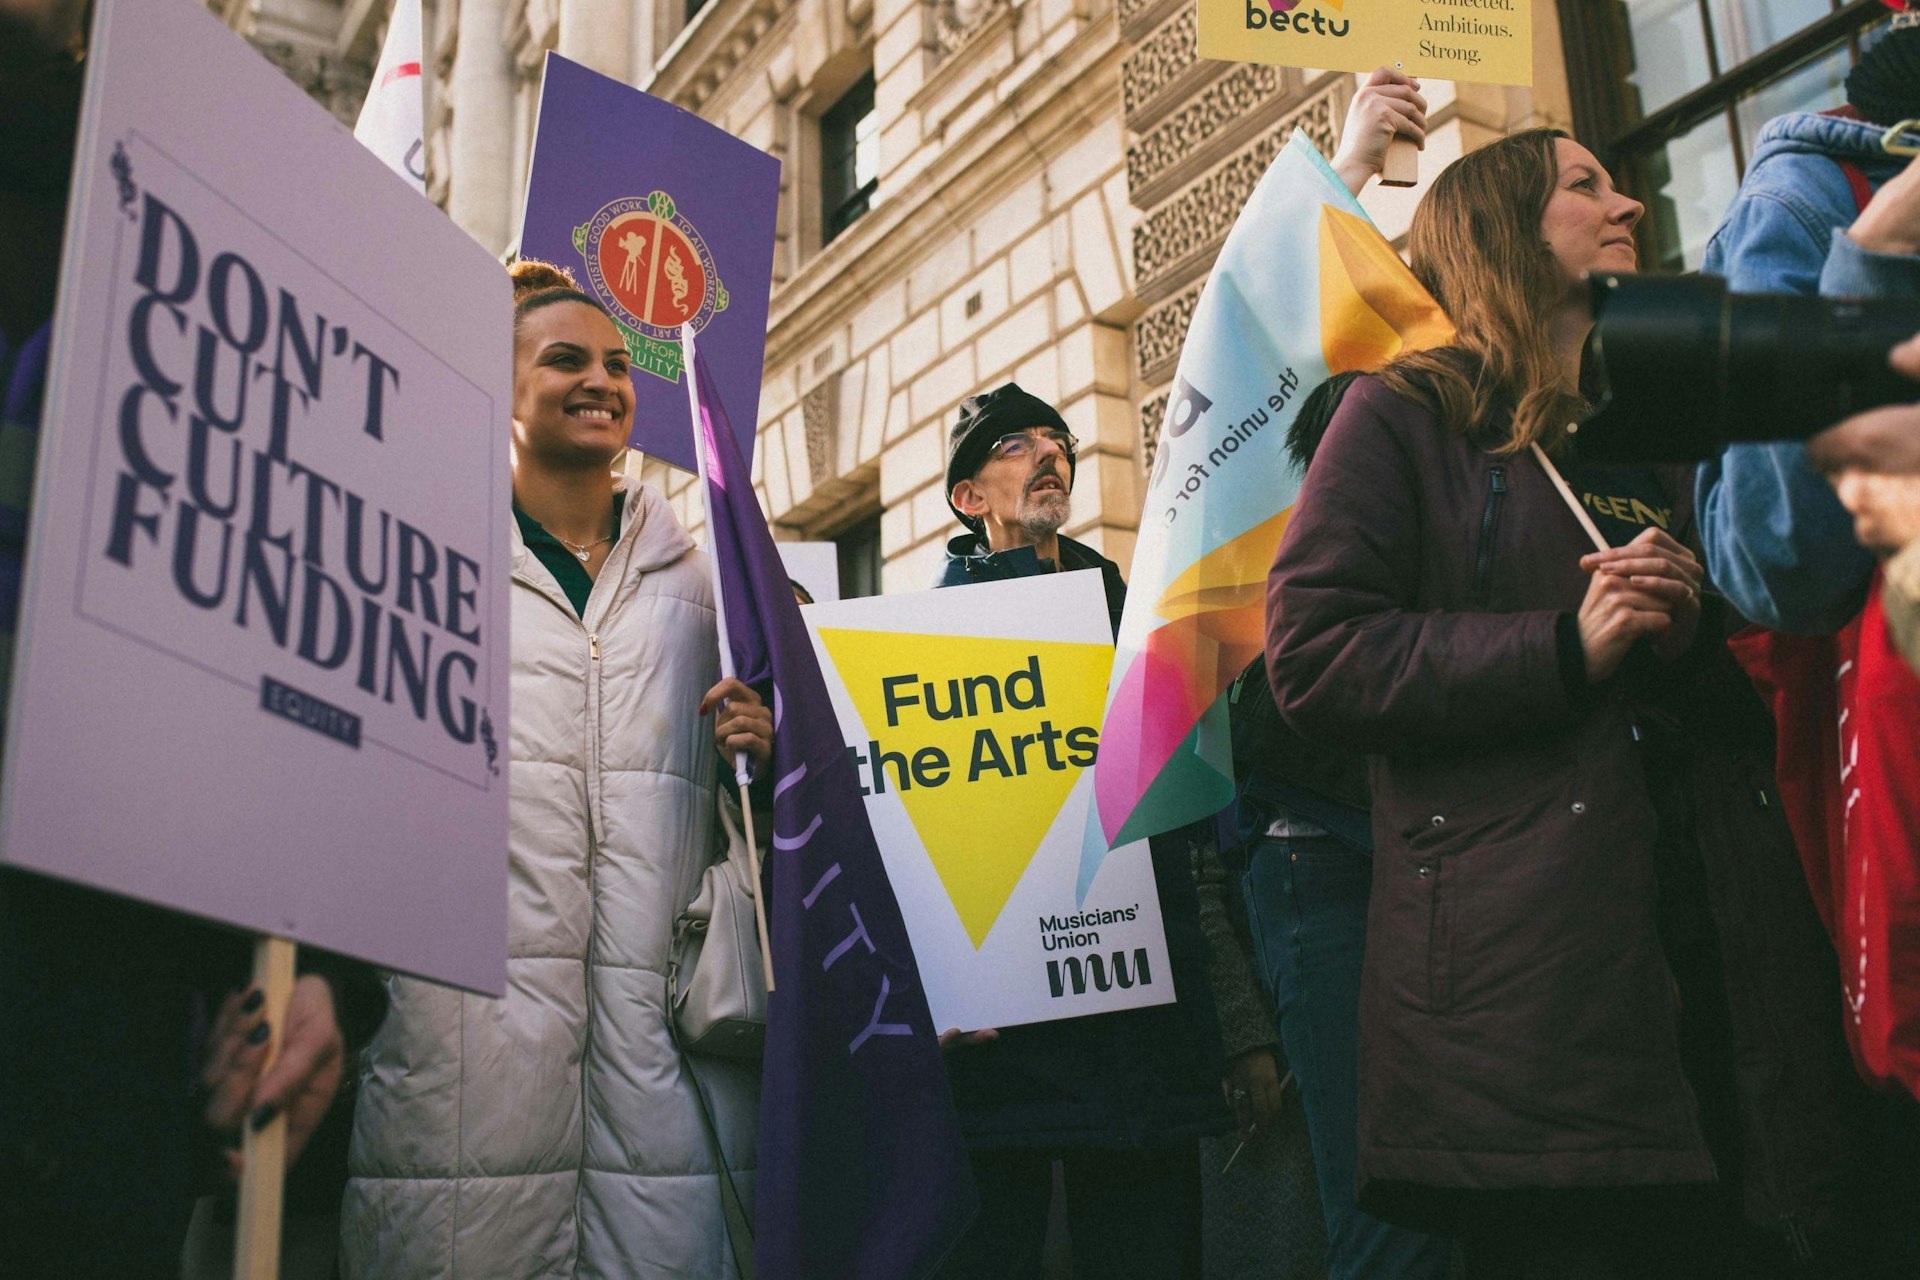 Protestors gather to oppose brutal cuts to arts funding